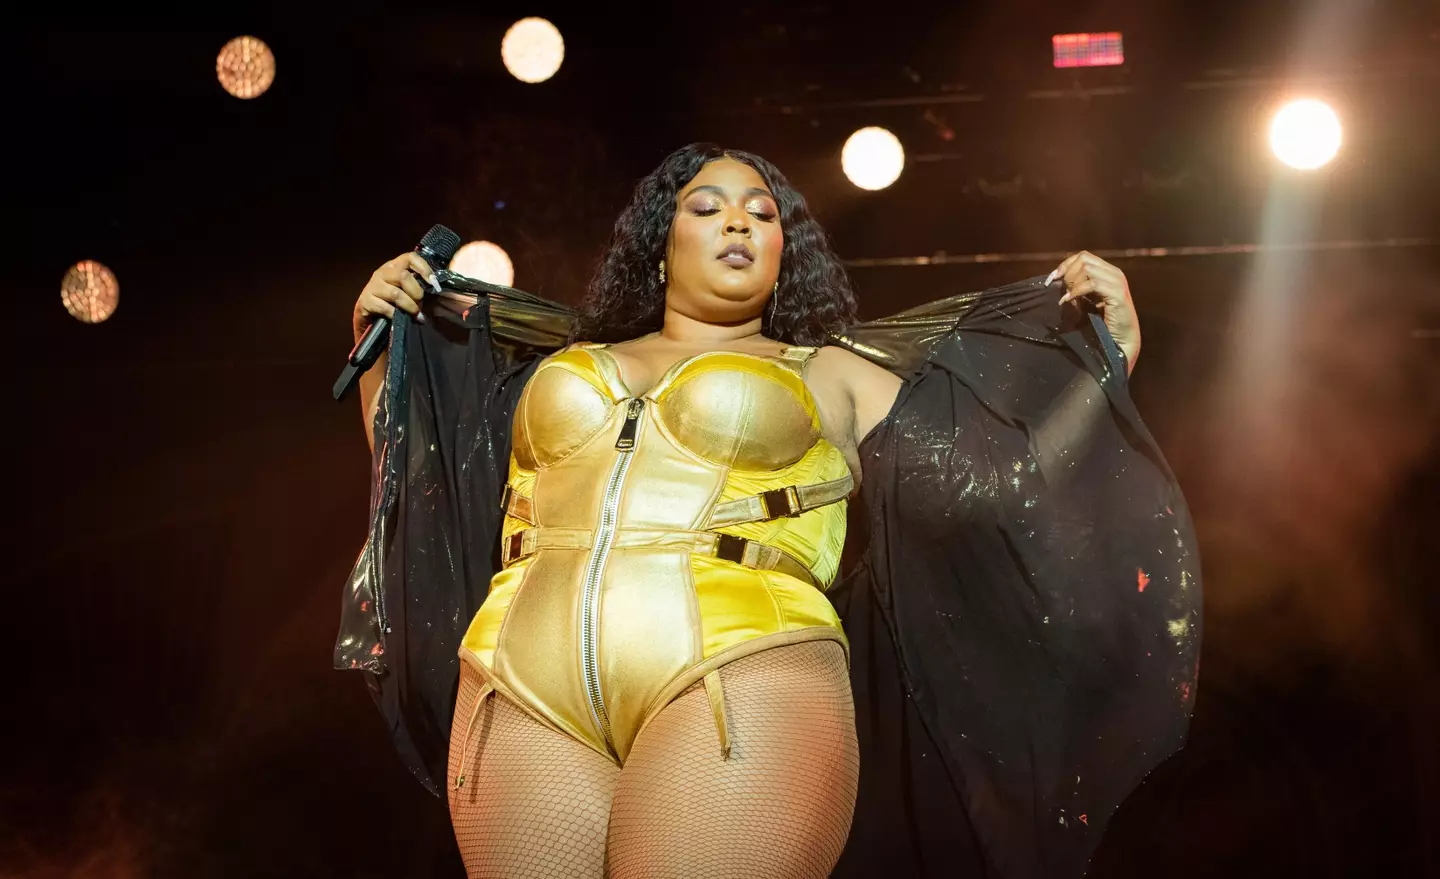 Lizzo says he body is a work of art.